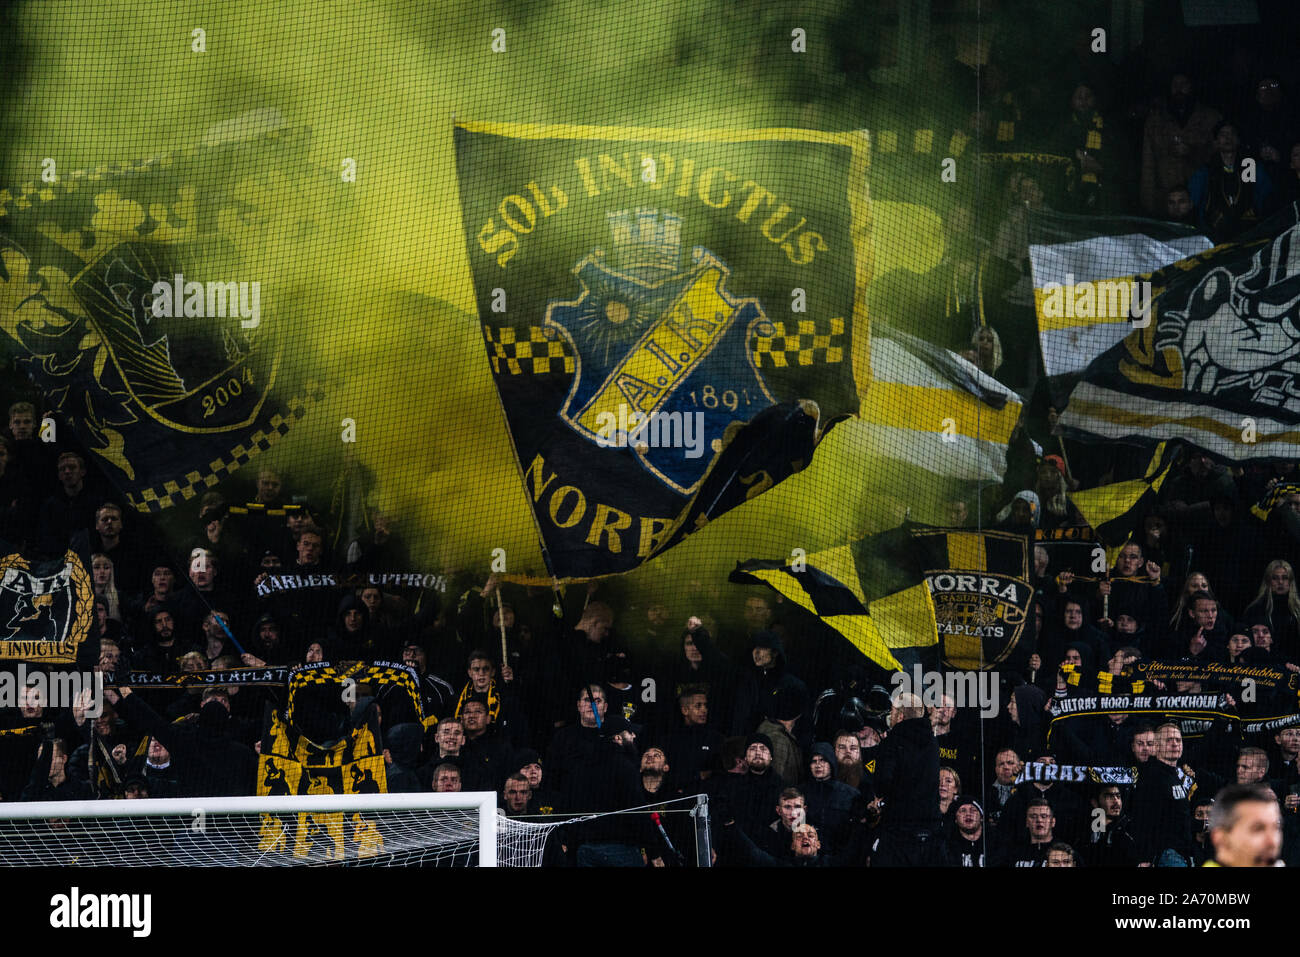 Malmo Sweden 28th Oct 2019 The Fans Of Aik Stockholm Seen In The Away Section For